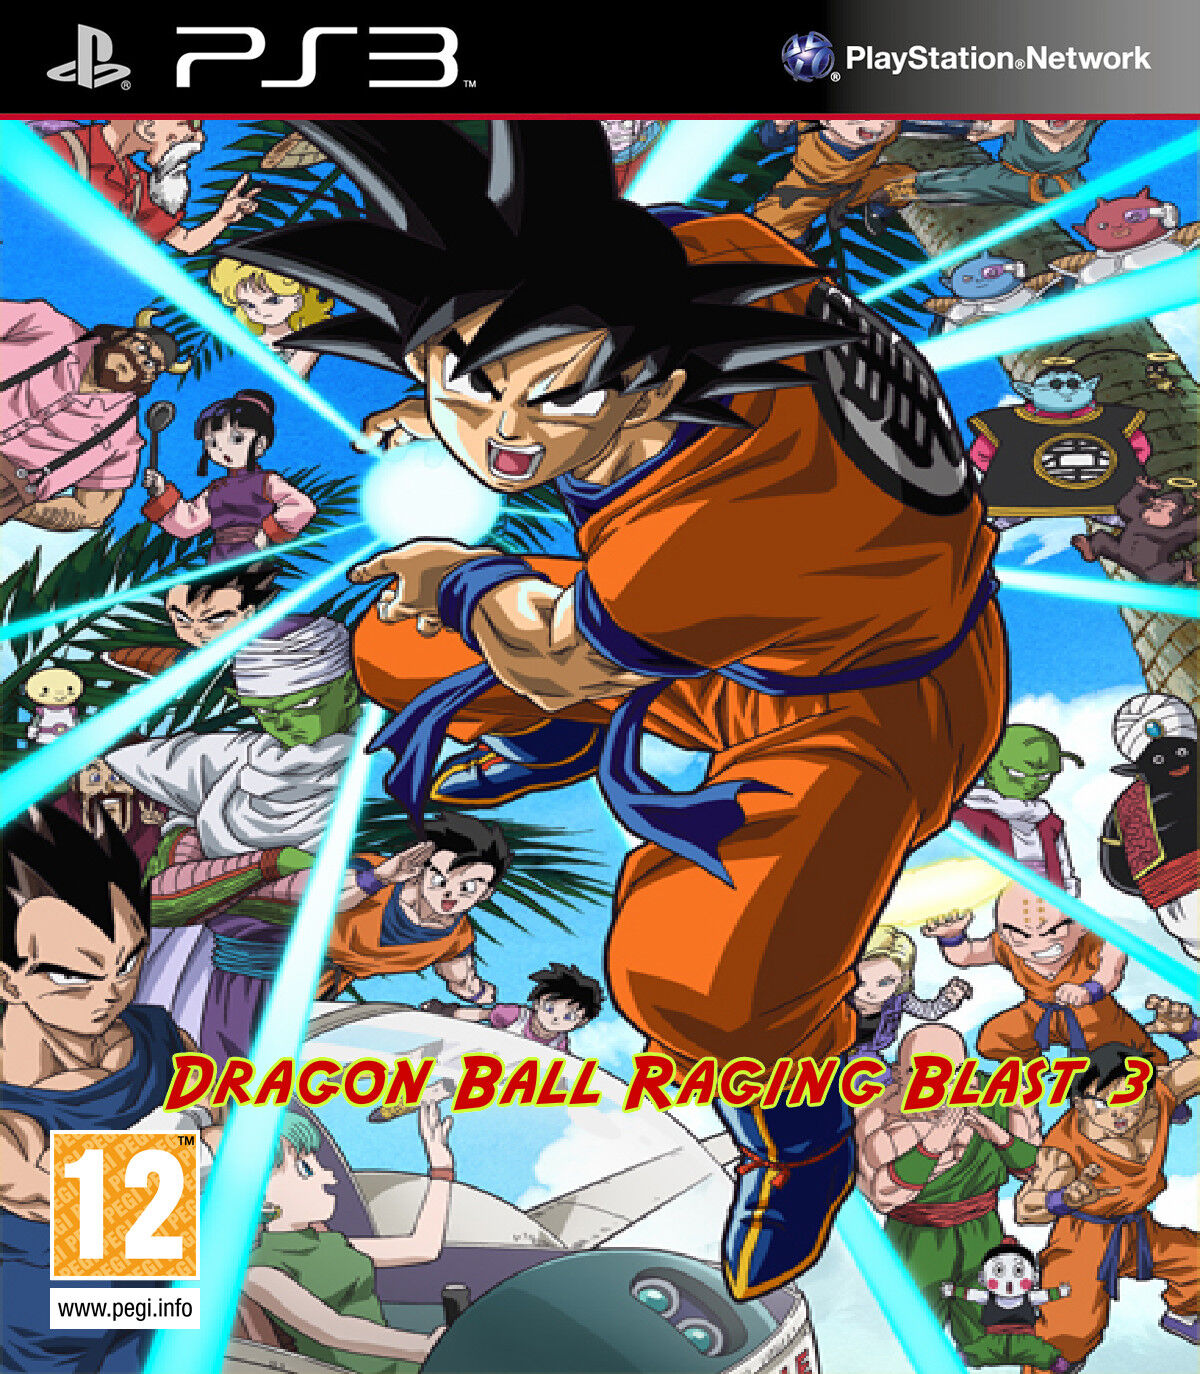 The Latest Dragon Ball Game Has Something In Common With Its MMO